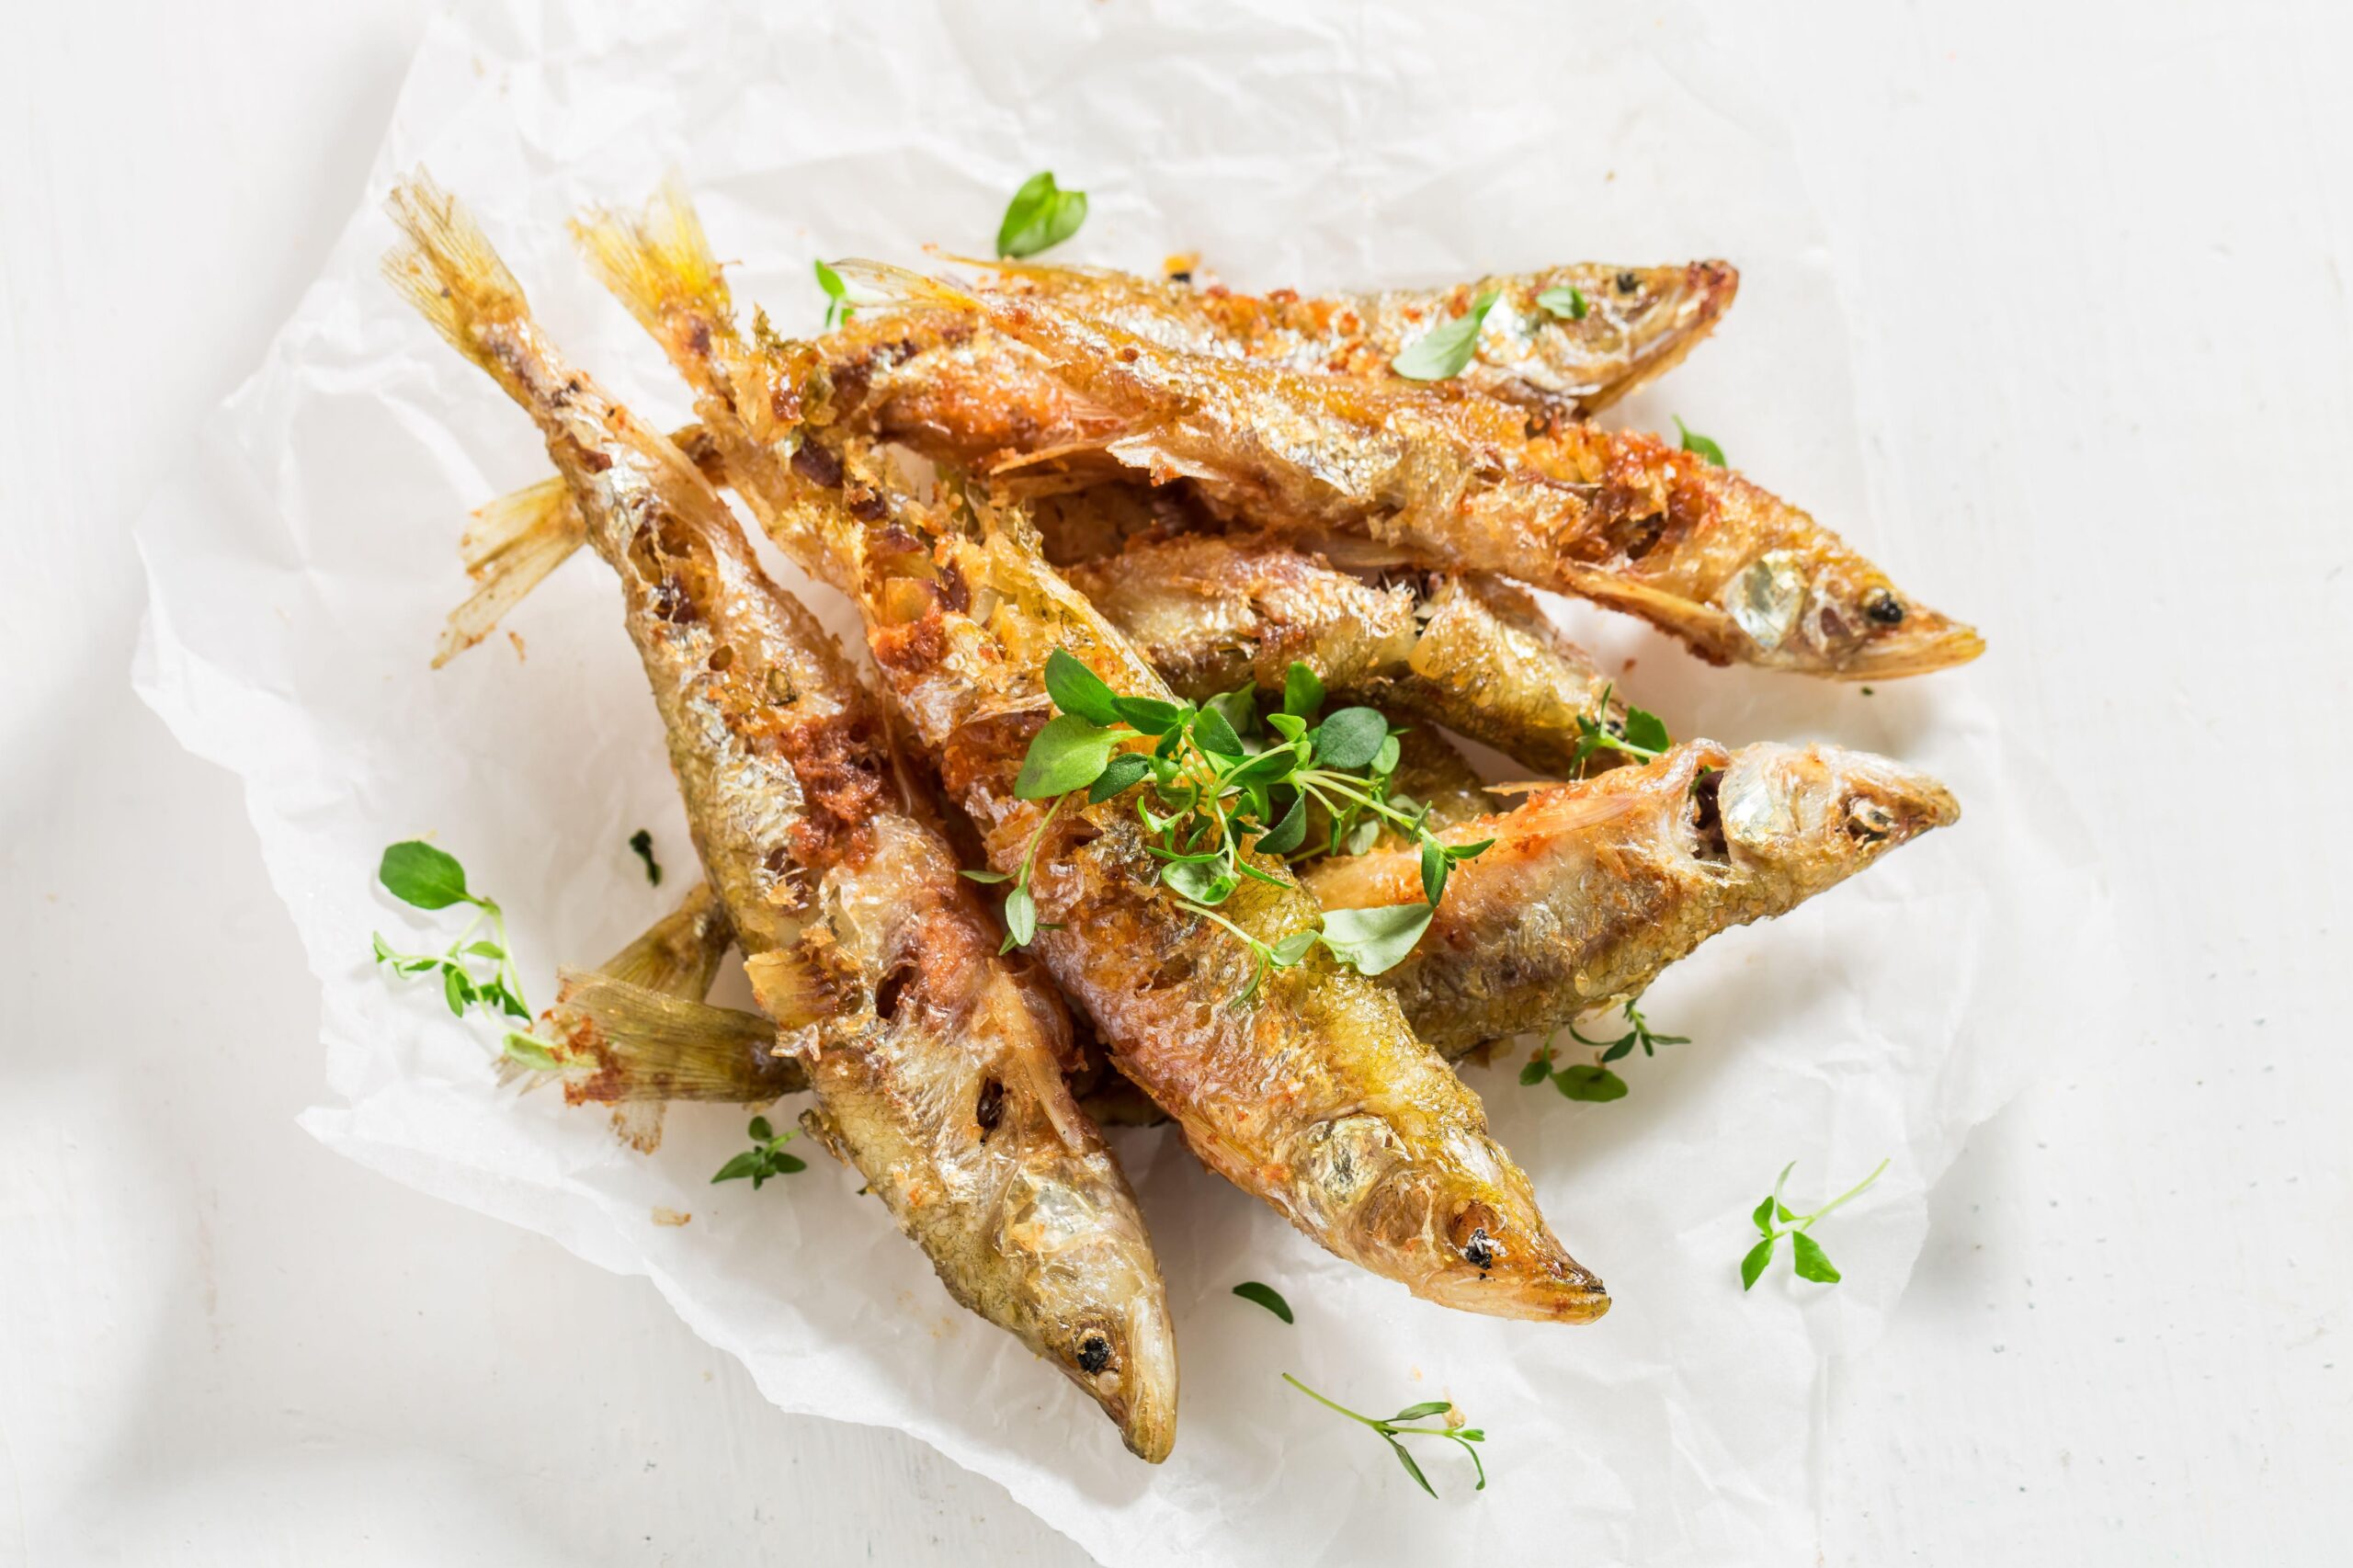  One bite of these baked smelts in white wine and you'll feel as if you're dining in Italy!